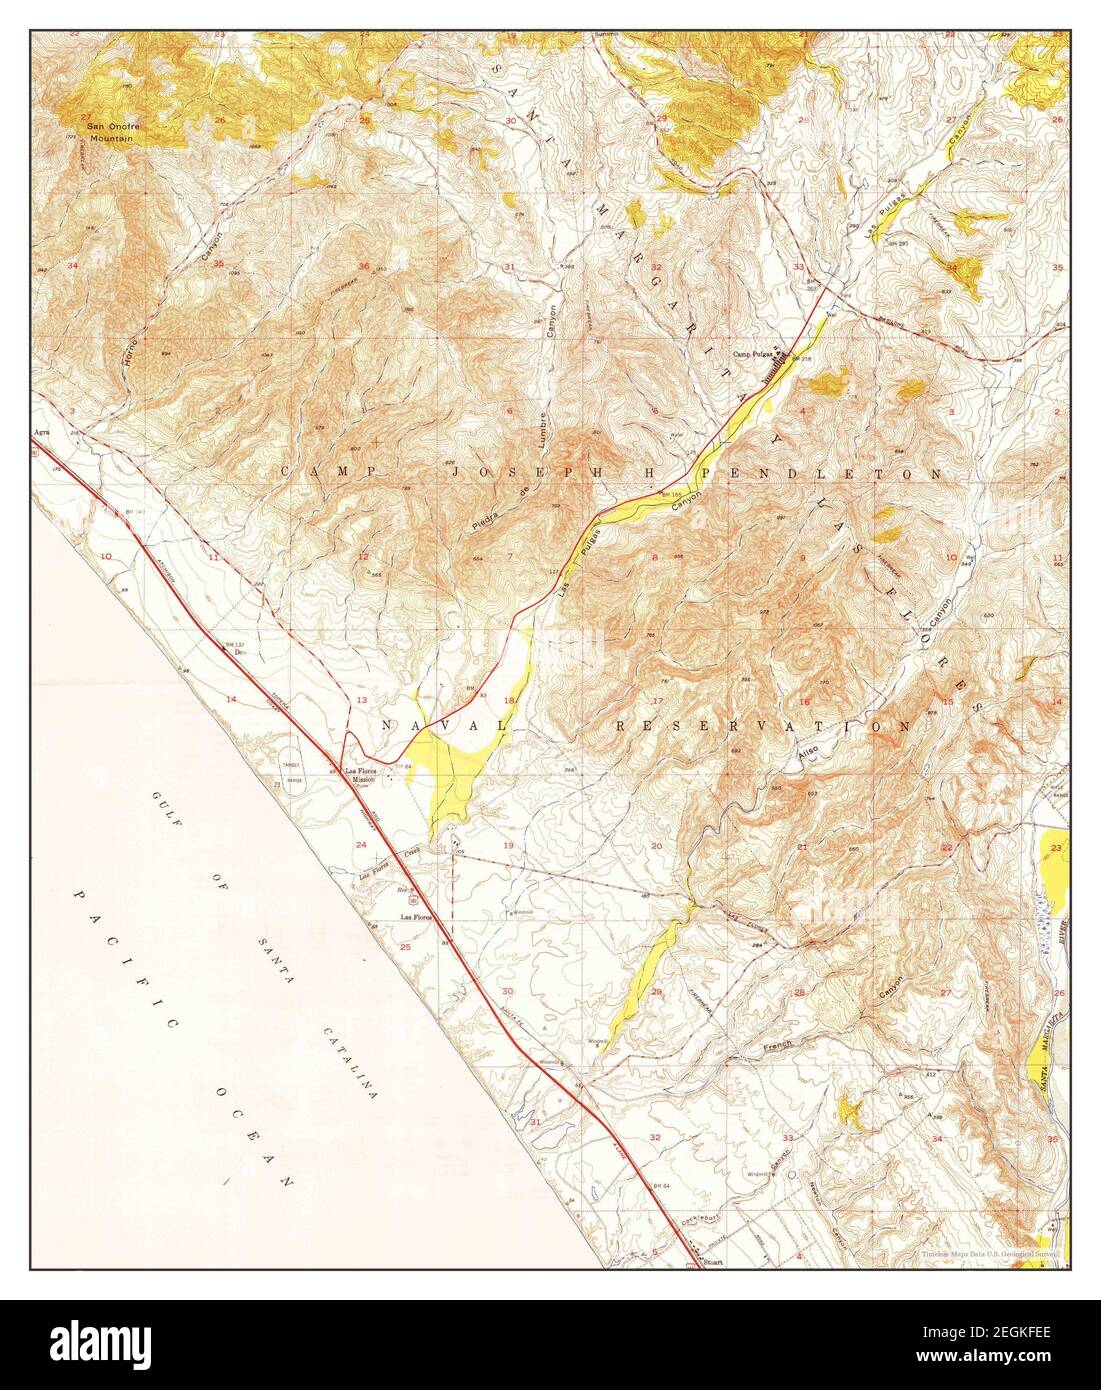 Las Pulgas Canyon, California, map 1949, 1:24000, United States of America by Timeless Maps, data U.S. Geological Survey Stock Photo